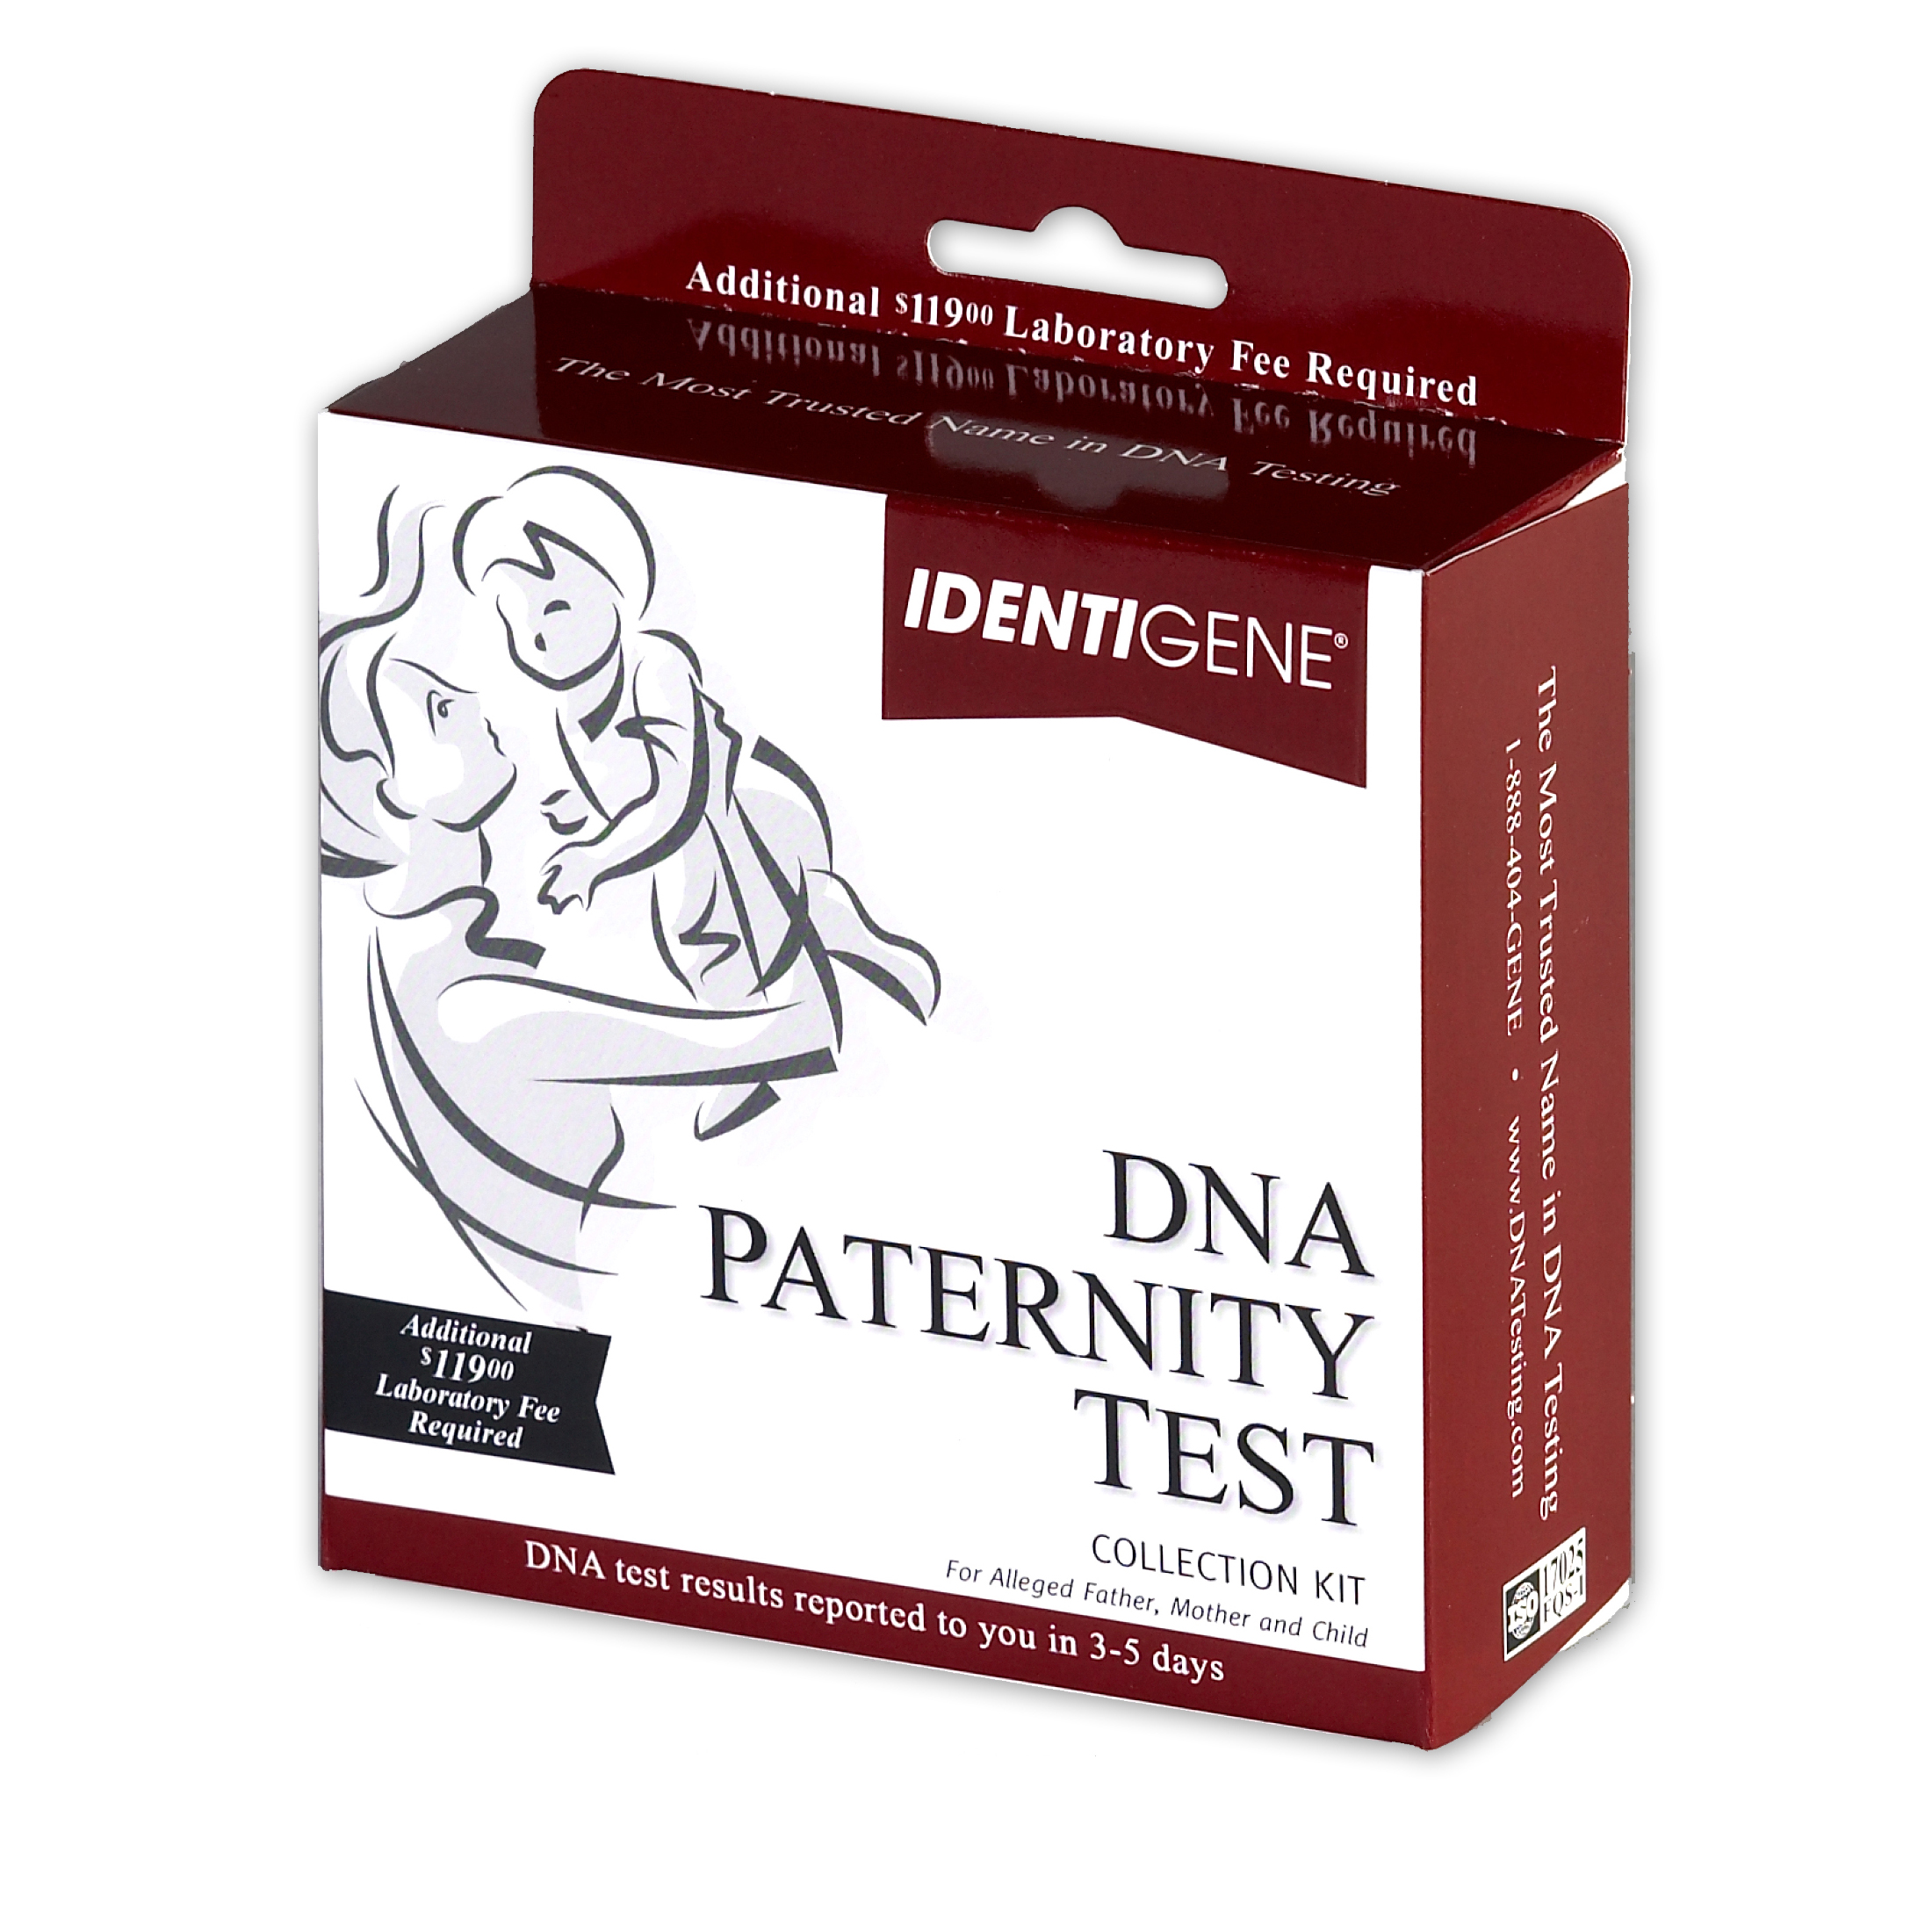 Test collection. Paternity Test. Paternity Test Results paper.